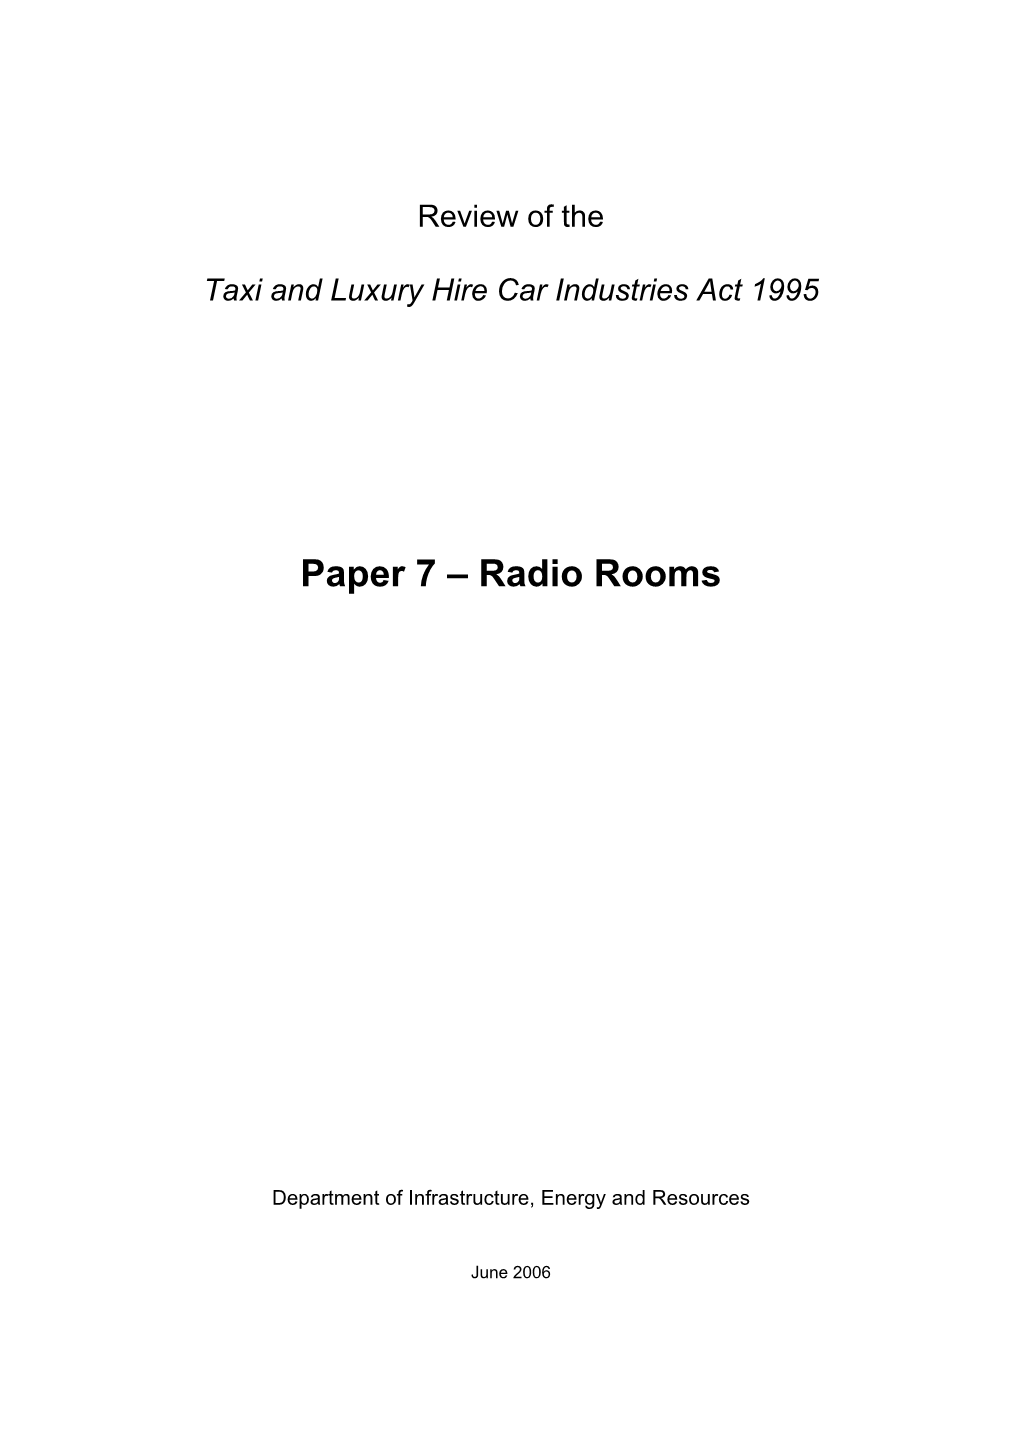 Taxi & Luxury Hire Car Industries Consultation and Discussion Paper